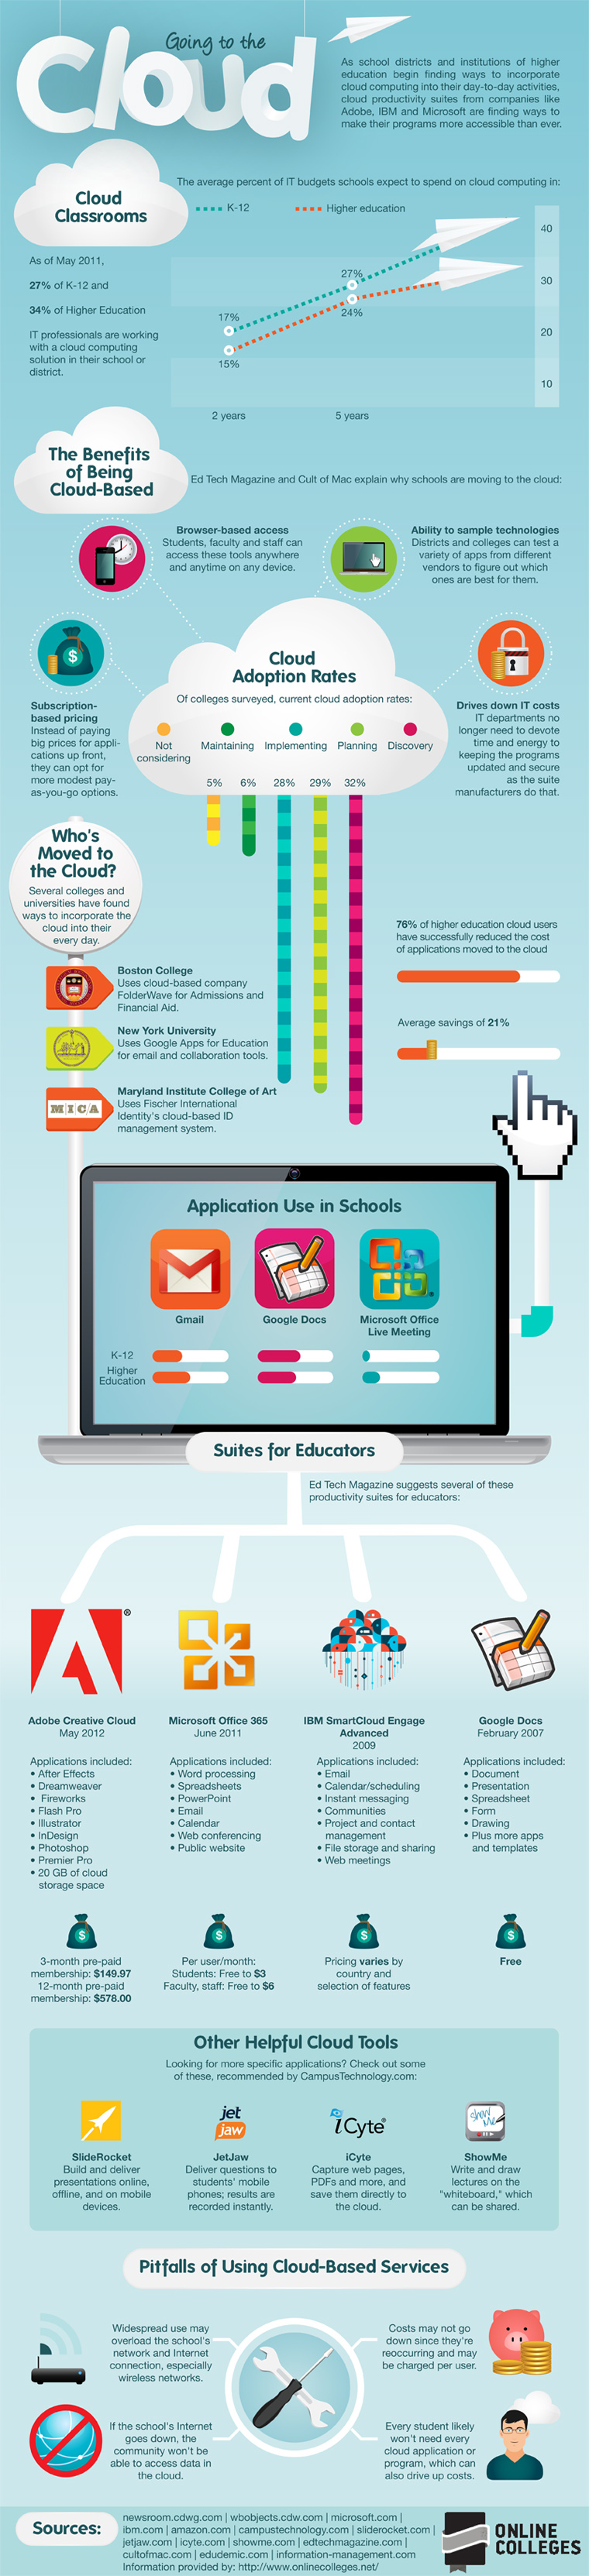 colleges-cloud-computing-infographic